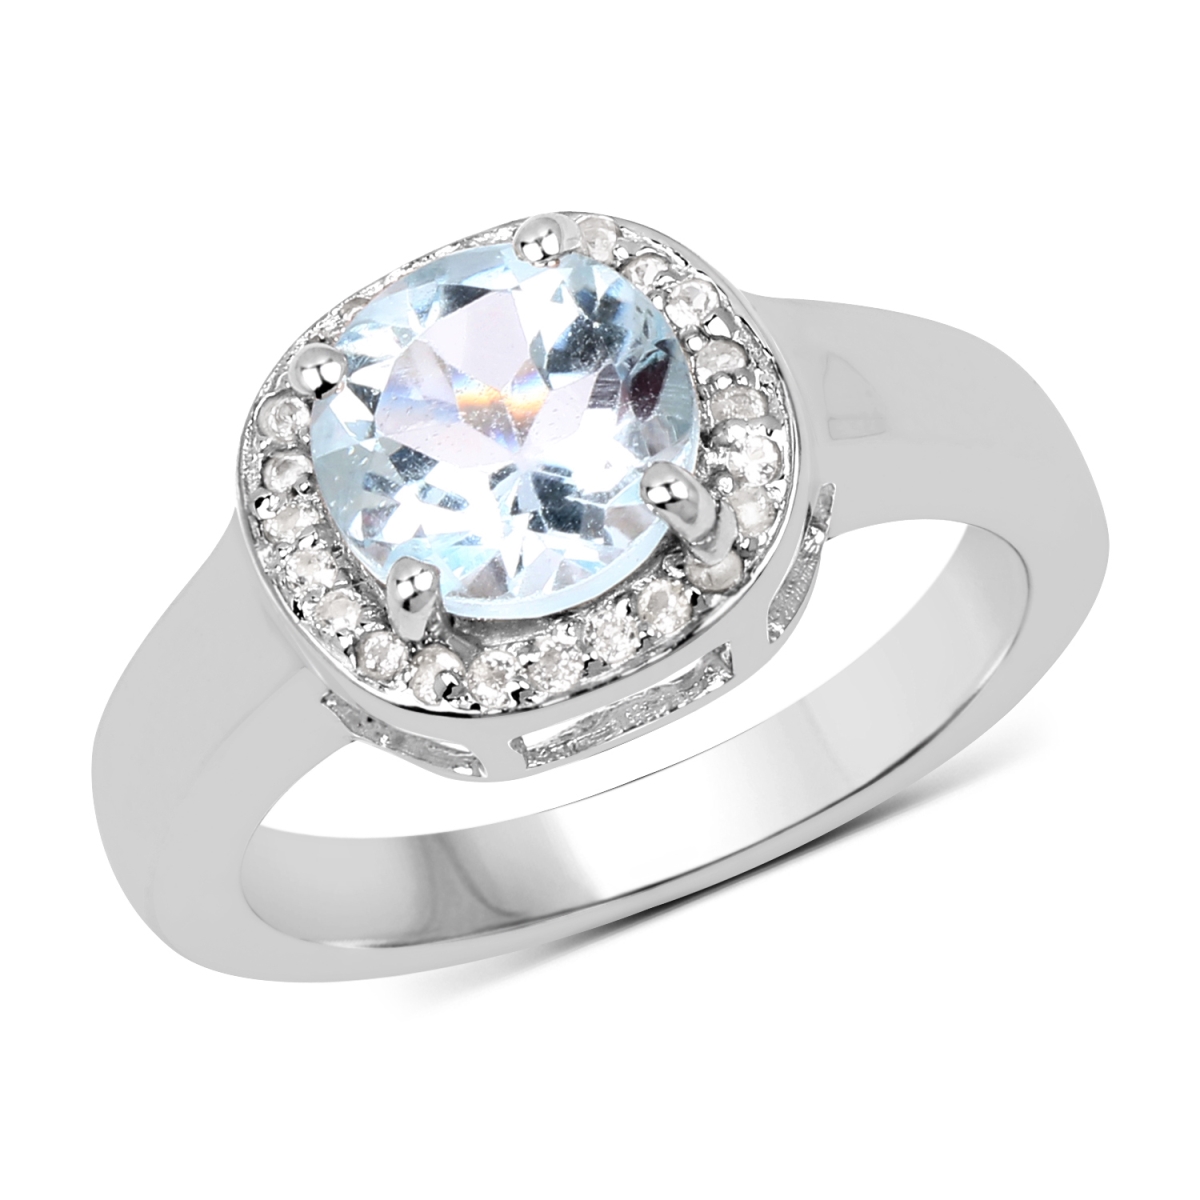 Picture of Malaika QR19249BTWT-SSR-9 2.37 Carat Genuine Blue Topaz & White Topaz 0.925 Sterling Silver Ring